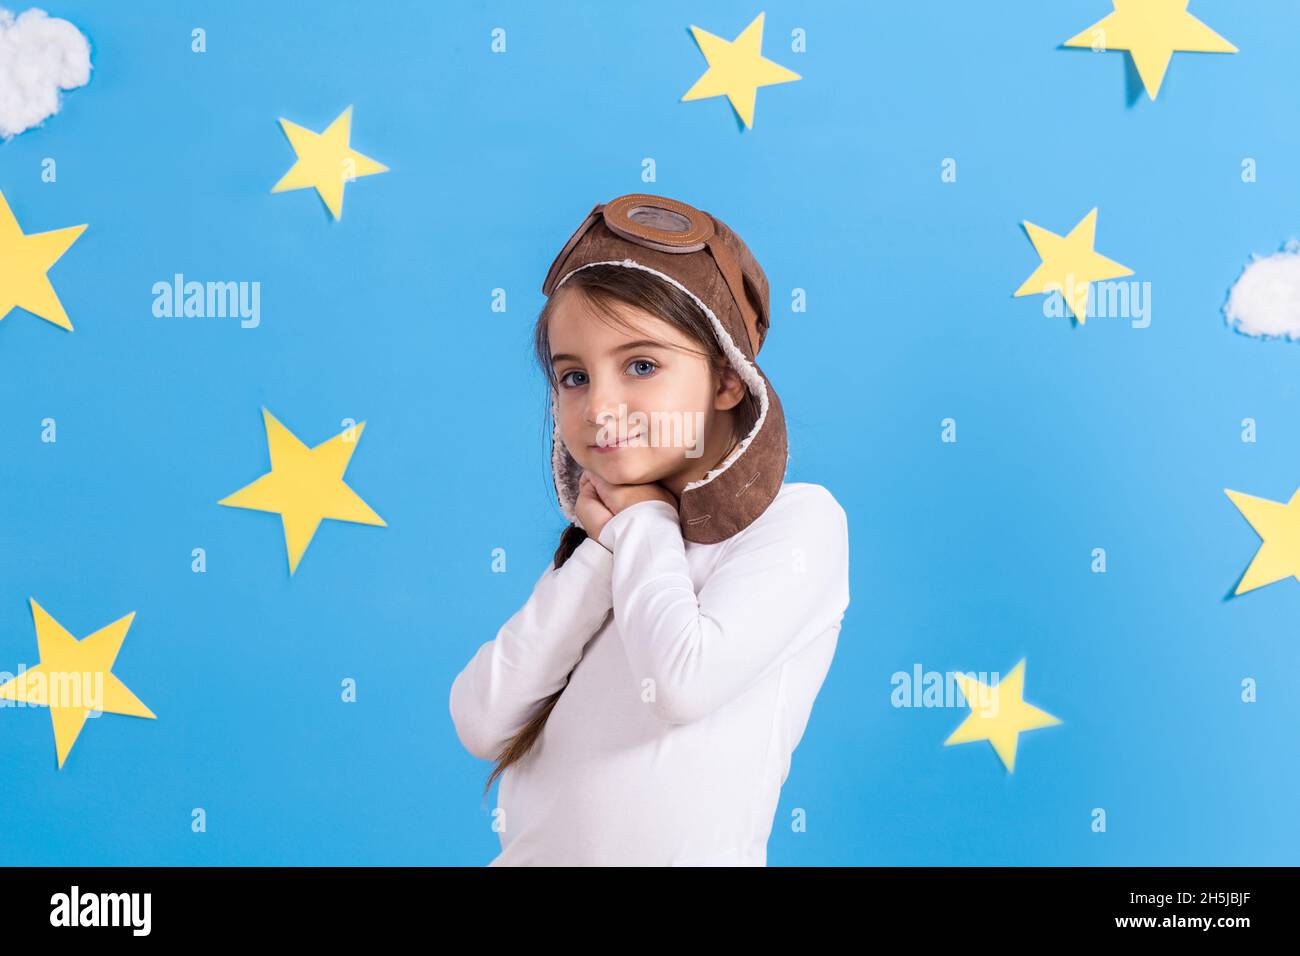 Little happy girl in aviator's cap smiling and playing, in white shirt at the studio. Blue sky, white clouds and stars background. Stock Photo